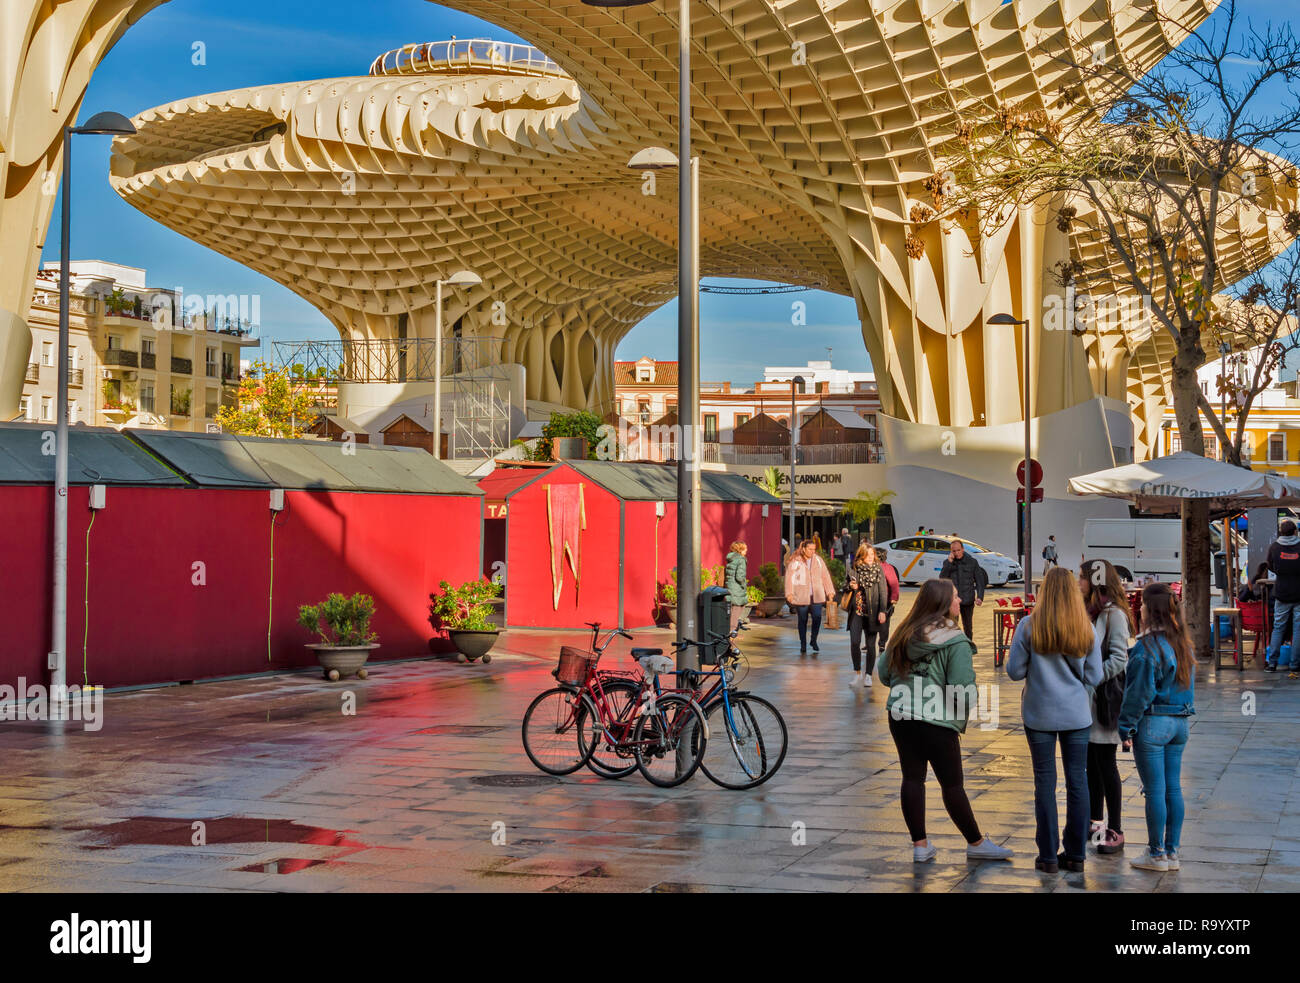 METROPOL PARASOL LA ENCARNACION SQUARE SEVILLE SPAIN EARLY MORNING WITH RED KIOSKS AND TOURISTS Stock Photo